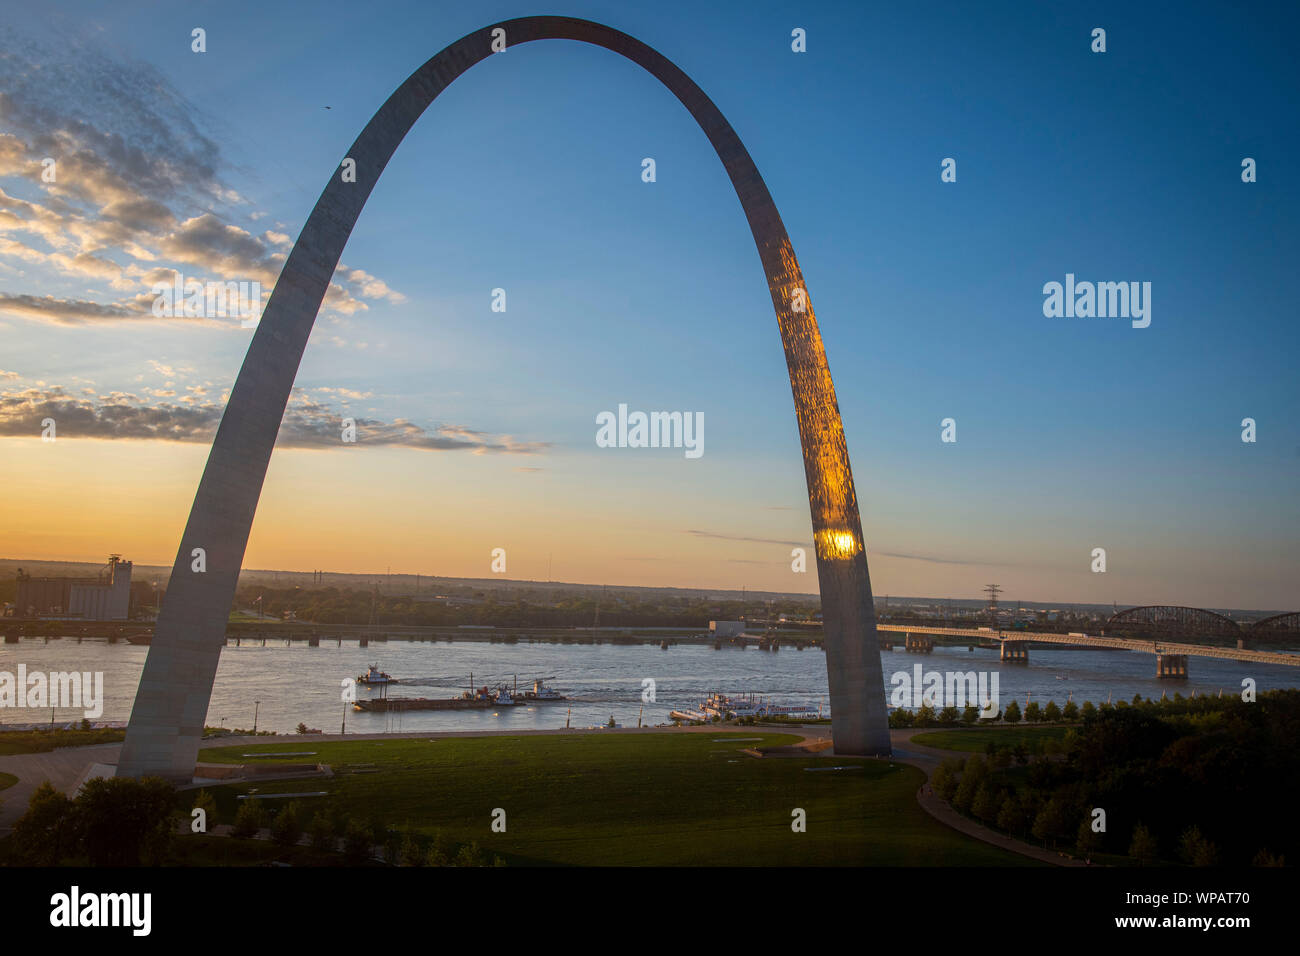 Barge traffic on the Mississippi River pass the Gateway Arch National Monument at sunset August 29, 2019 in St. Louis, Missouri, USA. A typical barge carries 1500 tons of cargo, which is 15 times greater than a rail car and 60 times greater than one trailer truck. An average river tow on the Mississippi River is 15 barges consisting of 5 barges tied together and moving 3 abreast. The same load would require a train 3 miles long or line of trucks stretching more than 35 miles. Stock Photo